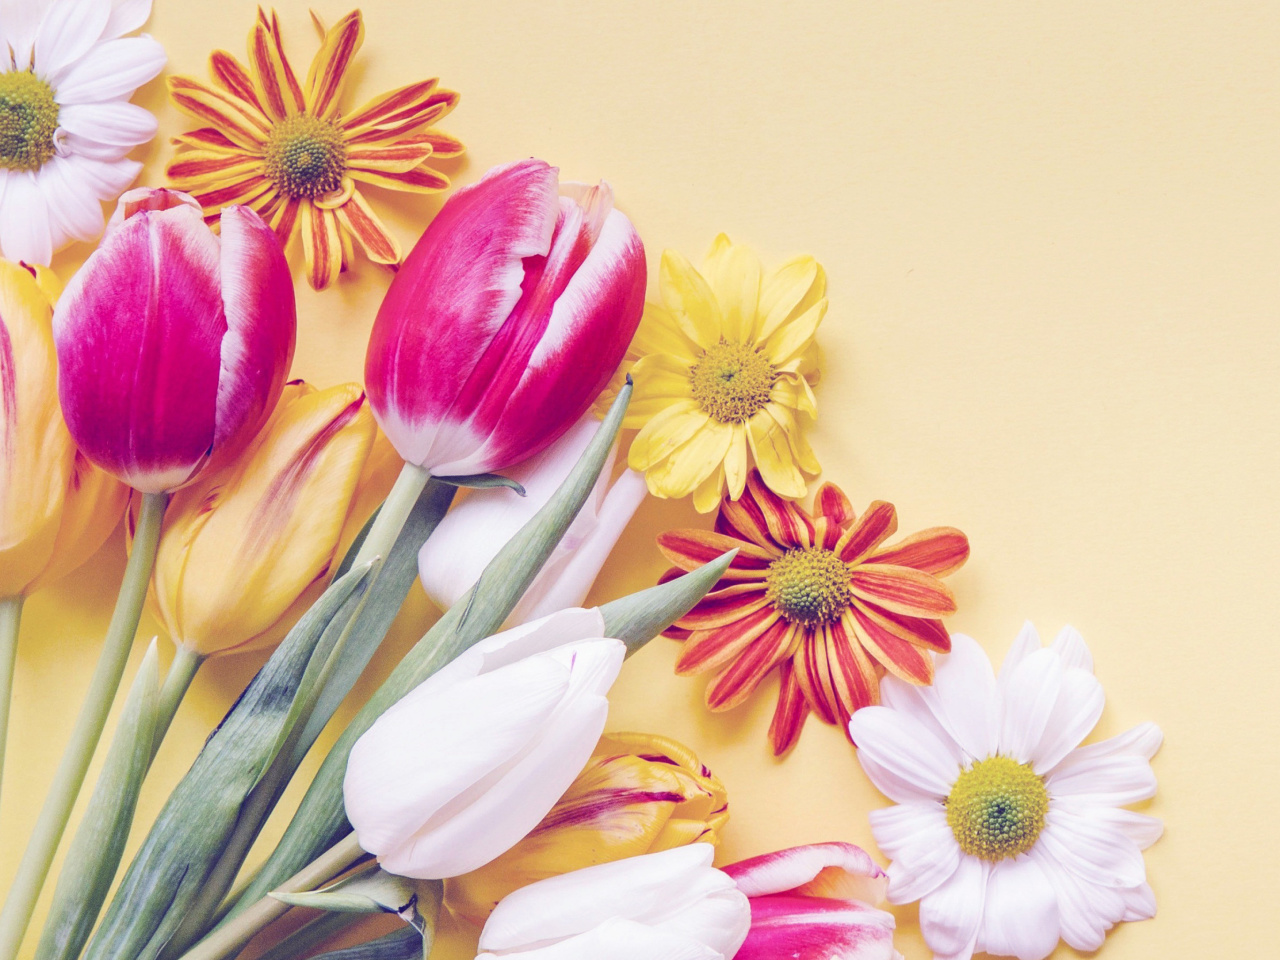 Spring tulips on yellow background wallpaper 1280x960